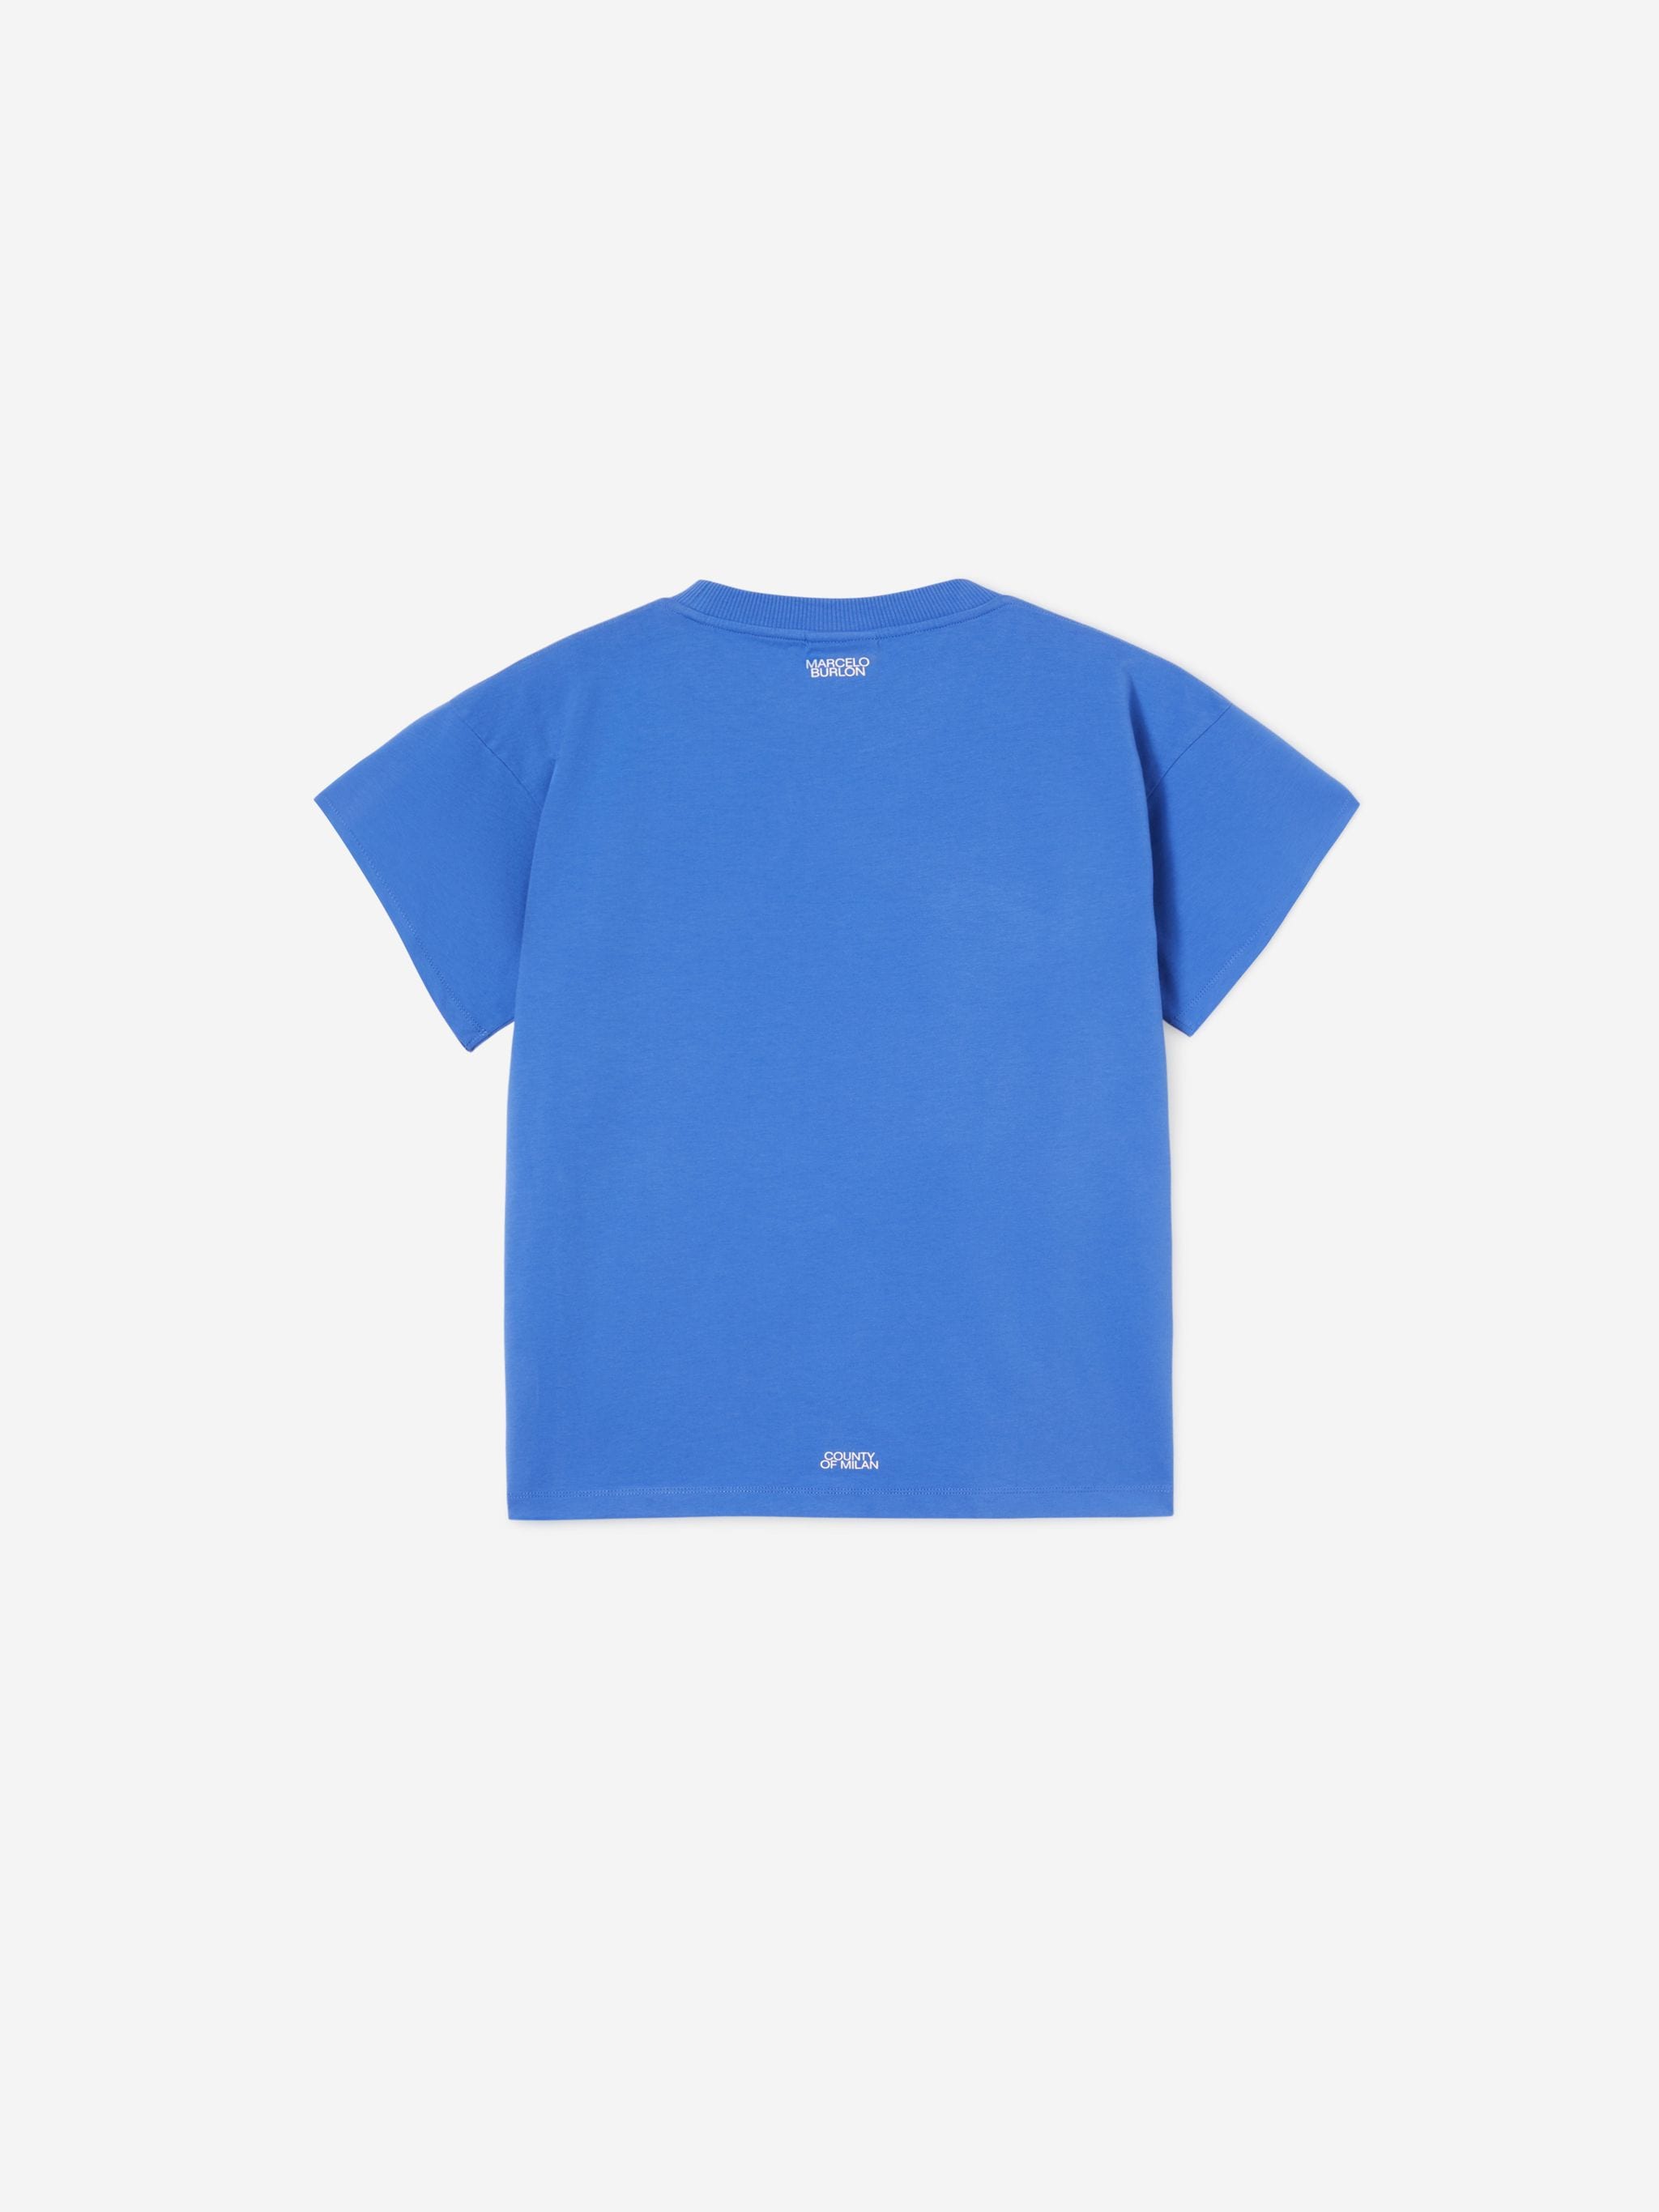 Blue/white cotton Cross-motif T-shirt from Marcelo Burlon County of Milan featuring signature Cross motif, crew neck and short sleeves. Conscious: This item is made from at least 50% organic materials.